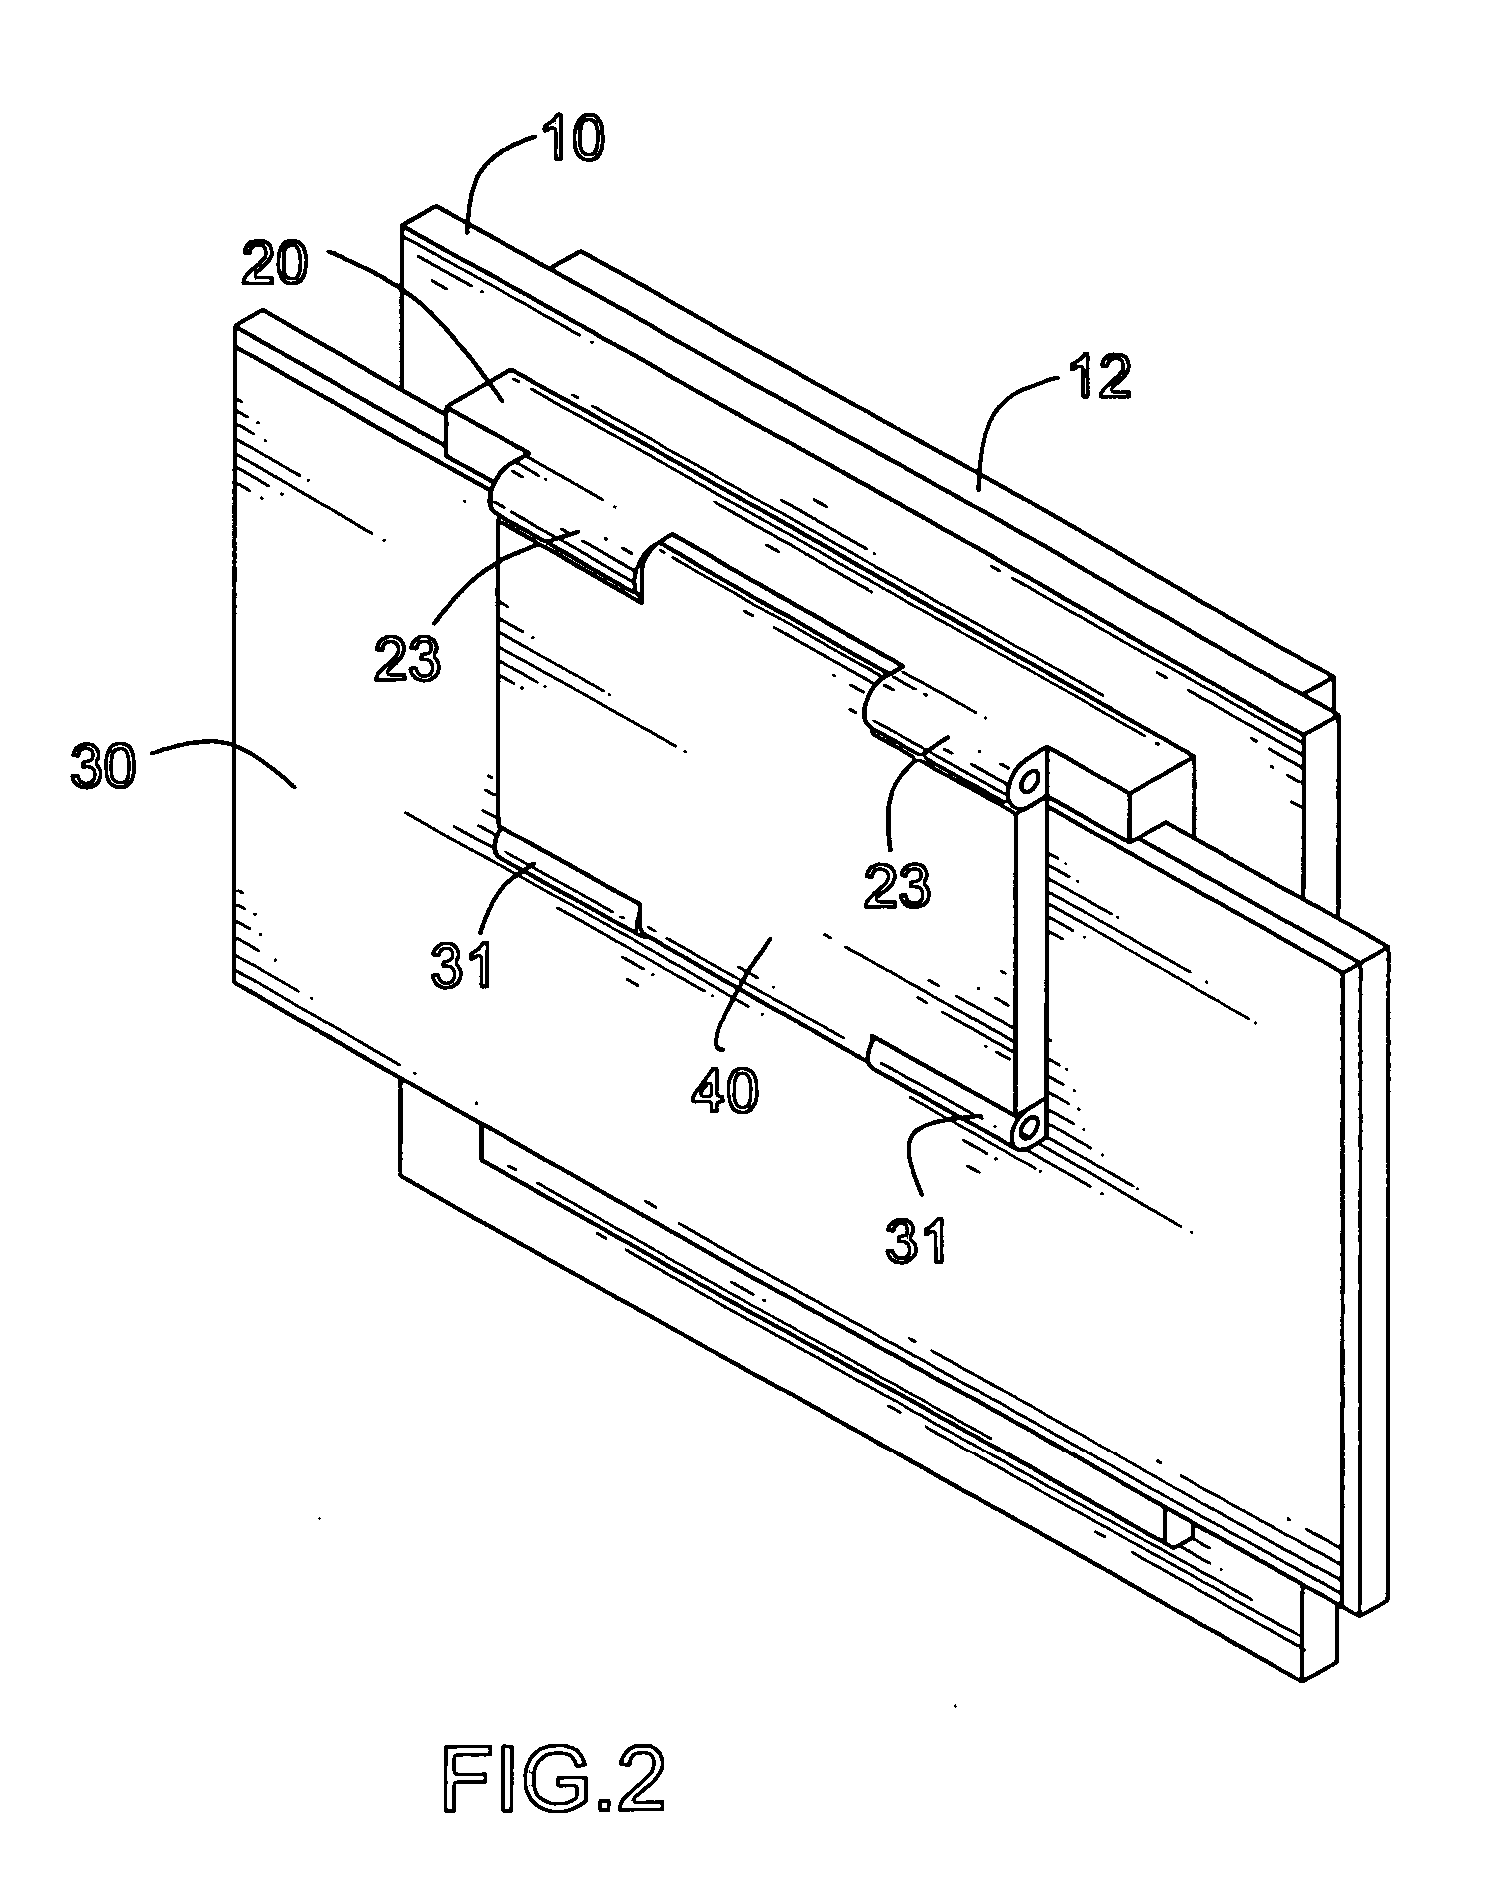 In-vehicle video/audio display device